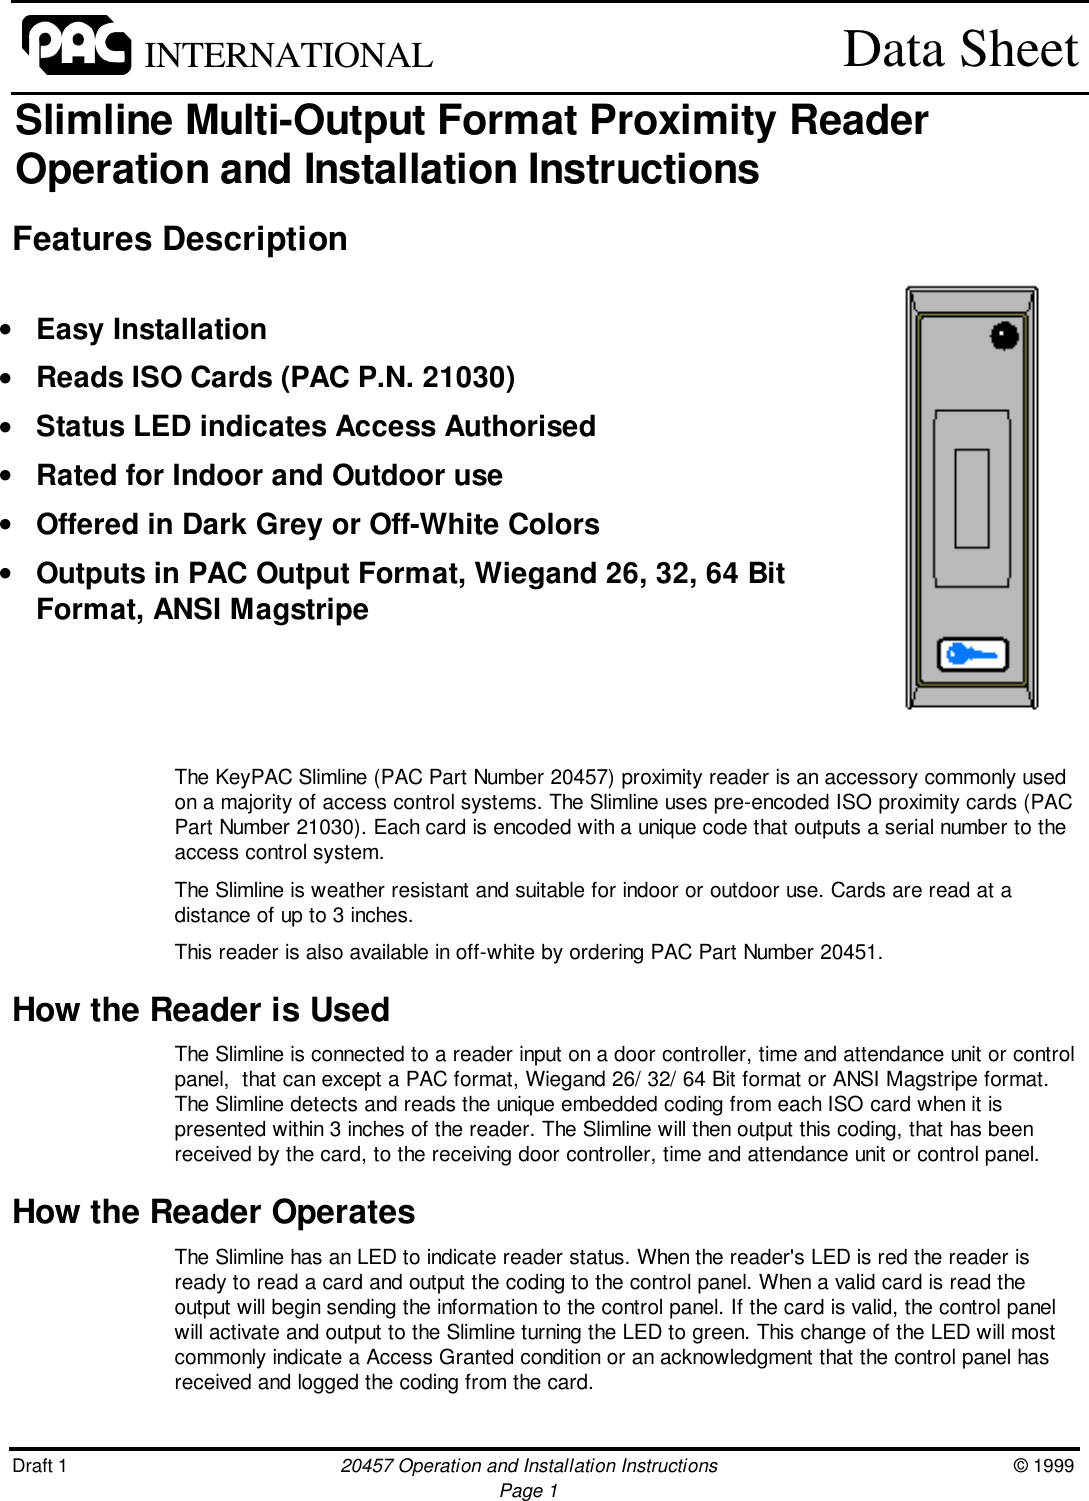 Draft 1 20457 Operation and Installation Instructions © 1999Page 1INTERNATIONAL Data SheetSlimline Multi-Output Format Proximity ReaderOperation and Installation InstructionsFeatures DescriptionThe KeyPAC Slimline (PAC Part Number 20457) proximity reader is an accessory commonly usedon a majority of access control systems. The Slimline uses pre-encoded ISO proximity cards (PACPart Number 21030). Each card is encoded with a unique code that outputs a serial number to theaccess control system.The Slimline is weather resistant and suitable for indoor or outdoor use. Cards are read at adistance of up to 3 inches.This reader is also available in off-white by ordering PAC Part Number 20451.How the Reader is UsedThe Slimline is connected to a reader input on a door controller, time and attendance unit or controlpanel,  that can except a PAC format, Wiegand 26/ 32/ 64 Bit format or ANSI Magstripe format.The Slimline detects and reads the unique embedded coding from each ISO card when it ispresented within 3 inches of the reader. The Slimline will then output this coding, that has beenreceived by the card, to the receiving door controller, time and attendance unit or control panel.How the Reader OperatesThe Slimline has an LED to indicate reader status. When the reader&apos;s LED is red the reader isready to read a card and output the coding to the control panel. When a valid card is read theoutput will begin sending the information to the control panel. If the card is valid, the control panelwill activate and output to the Slimline turning the LED to green. This change of the LED will mostcommonly indicate a Access Granted condition or an acknowledgment that the control panel hasreceived and logged the coding from the card.• Easy Installation• Reads ISO Cards (PAC P.N. 21030)• Status LED indicates Access Authorised• Rated for Indoor and Outdoor use• Offered in Dark Grey or Off-White Colors• Outputs in PAC Output Format, Wiegand 26, 32, 64 BitFormat, ANSI Magstripe